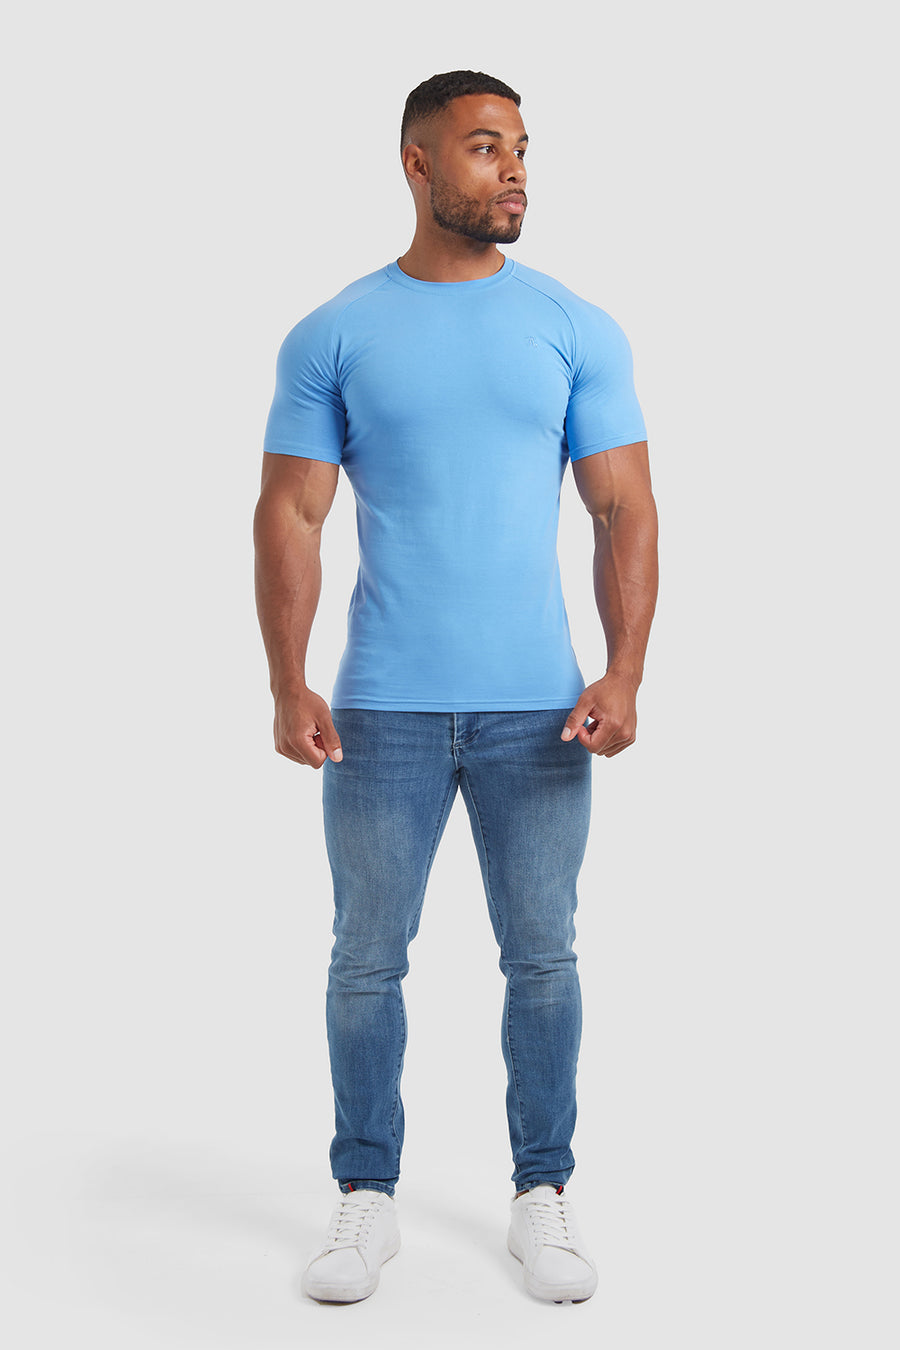 Athletic Fit T-Shirt in Azure - TAILORED ATHLETE - USA